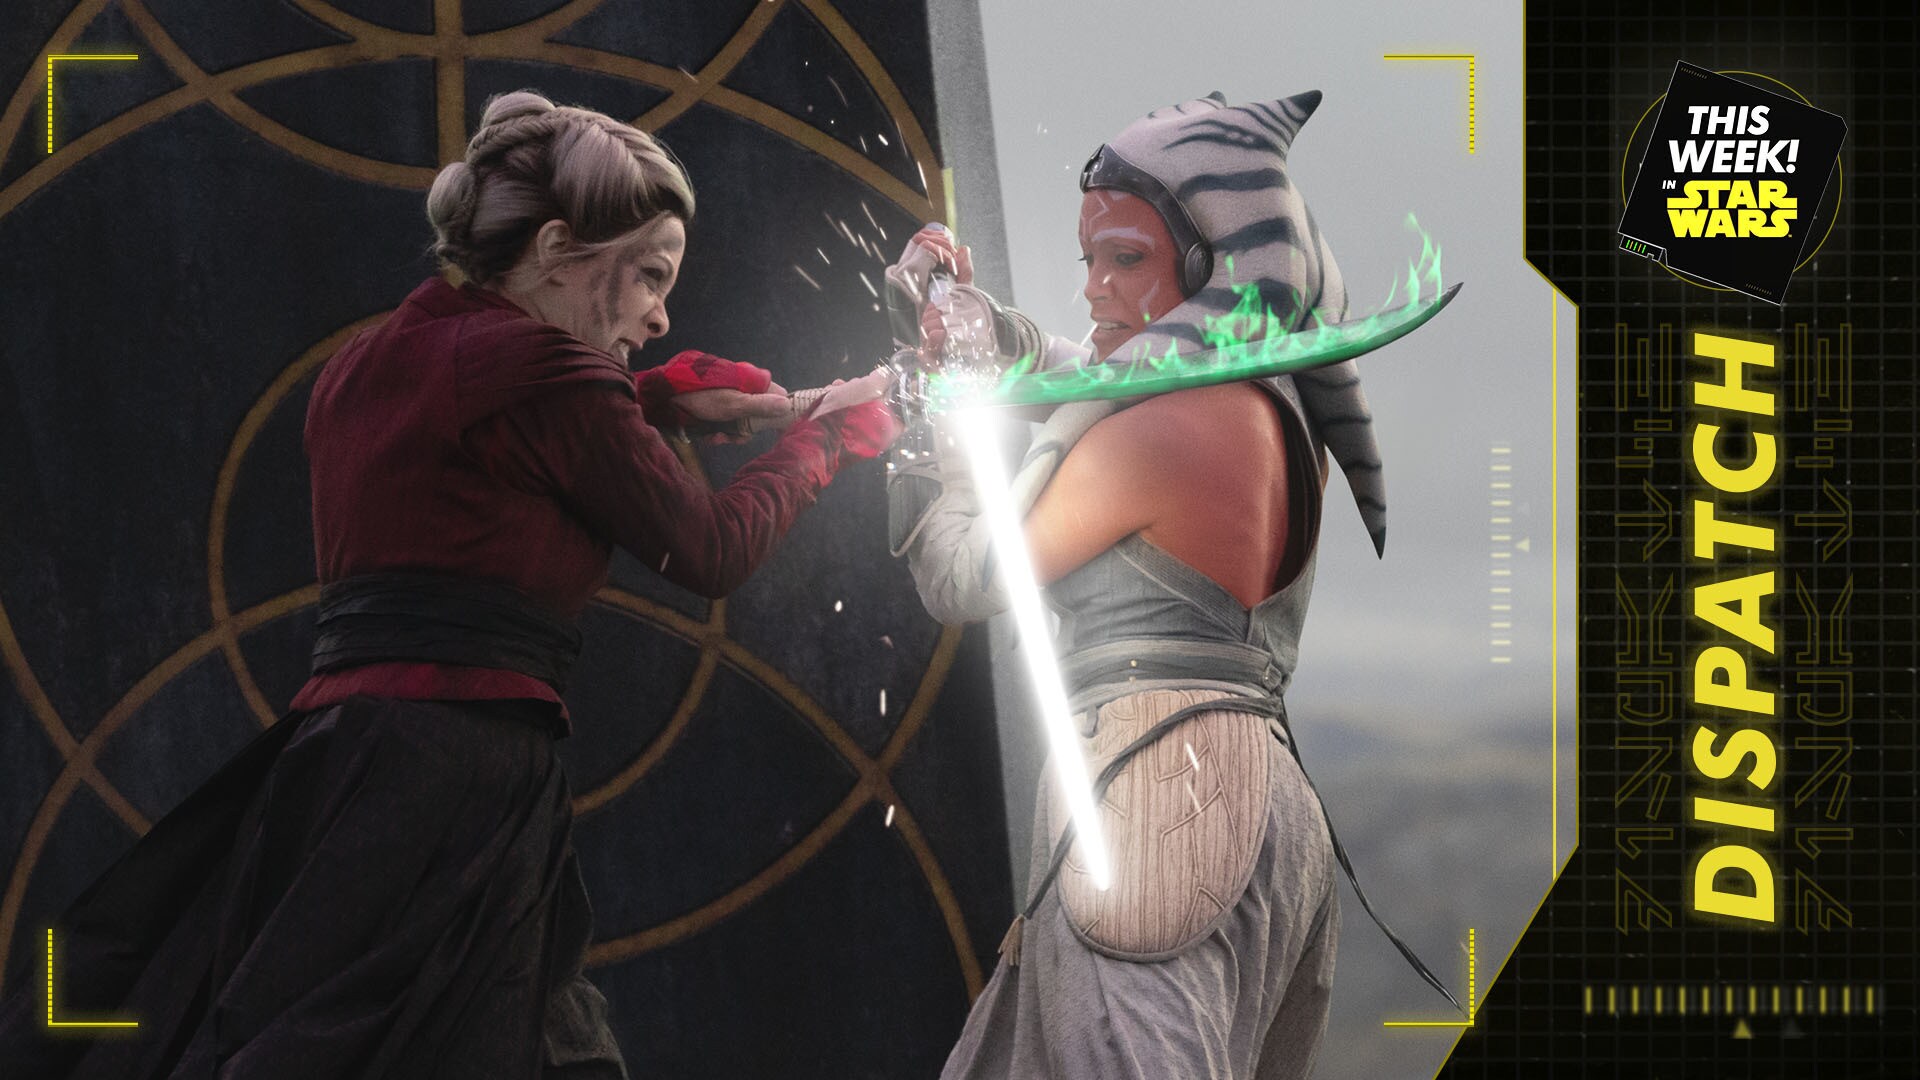 The Jedi, the Witch, and Warlord | This Week! in Star Wars Dispatch